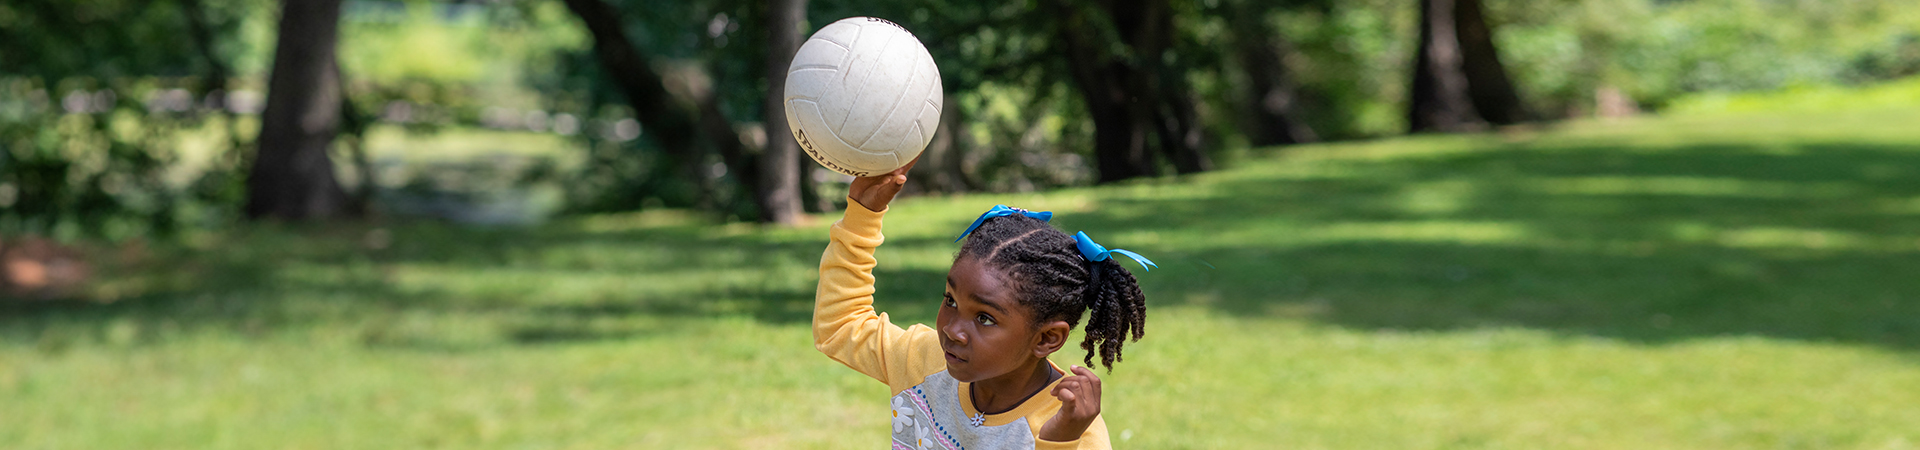  girl with soccer ball playing outside 